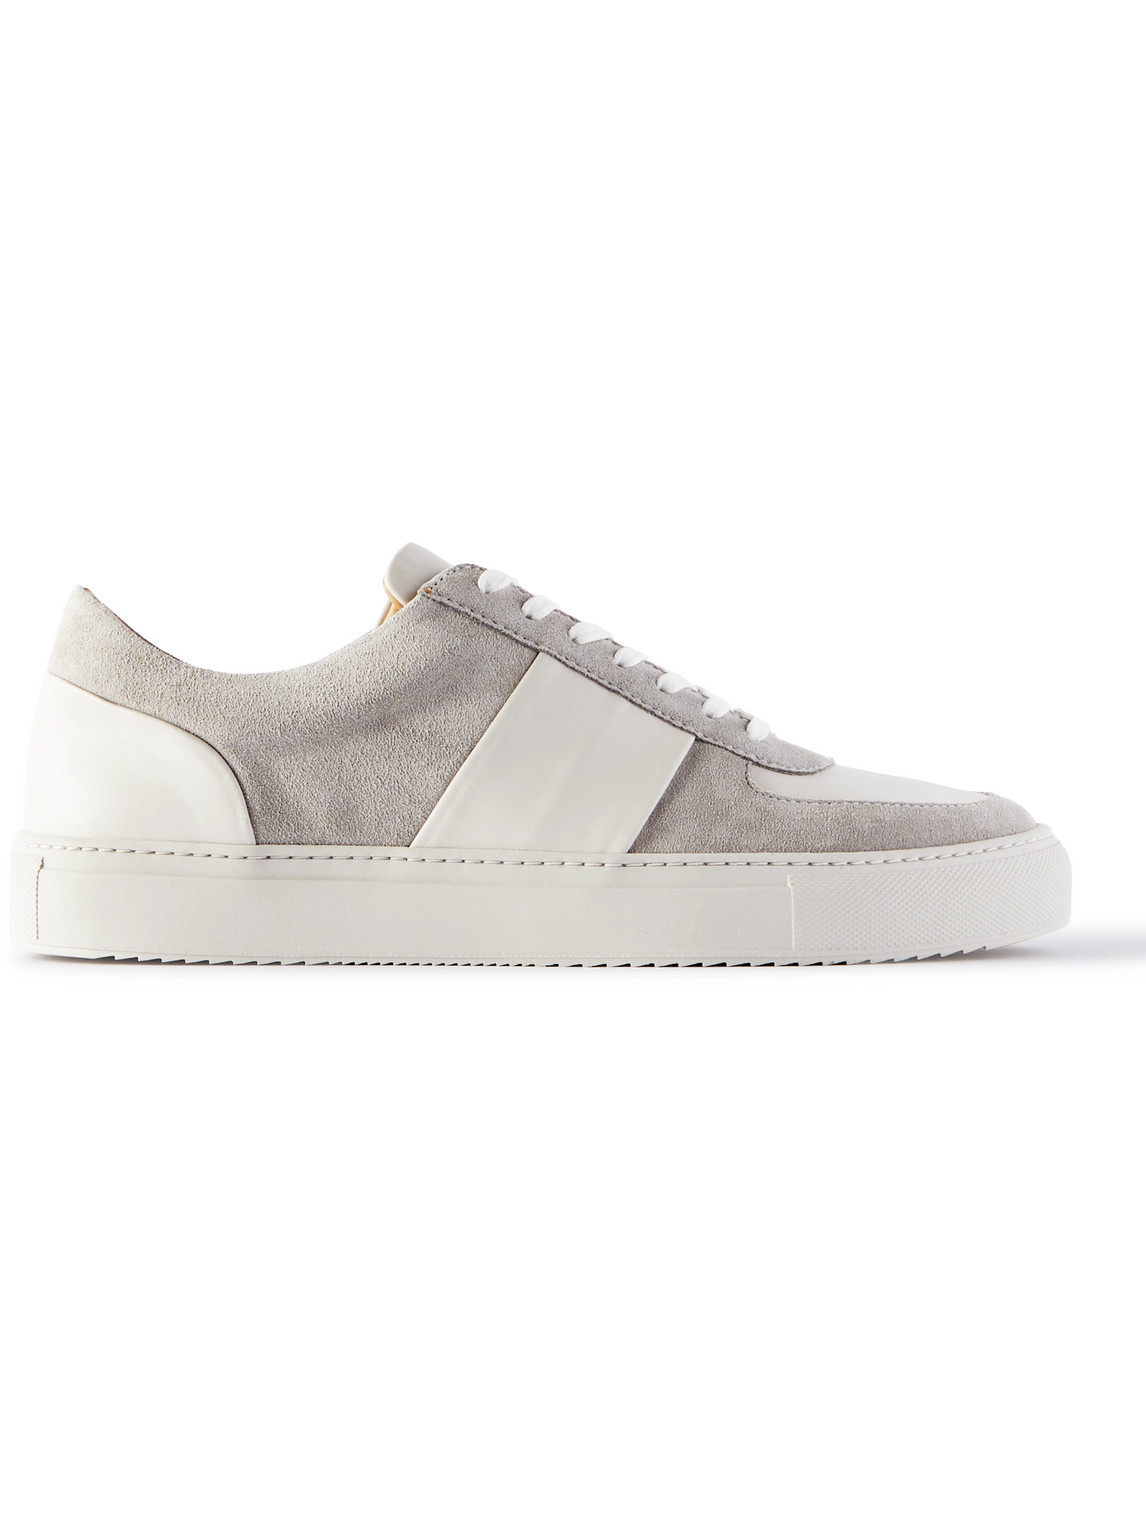 Mr P. Larry Suede And Leather Sneakers In Gray